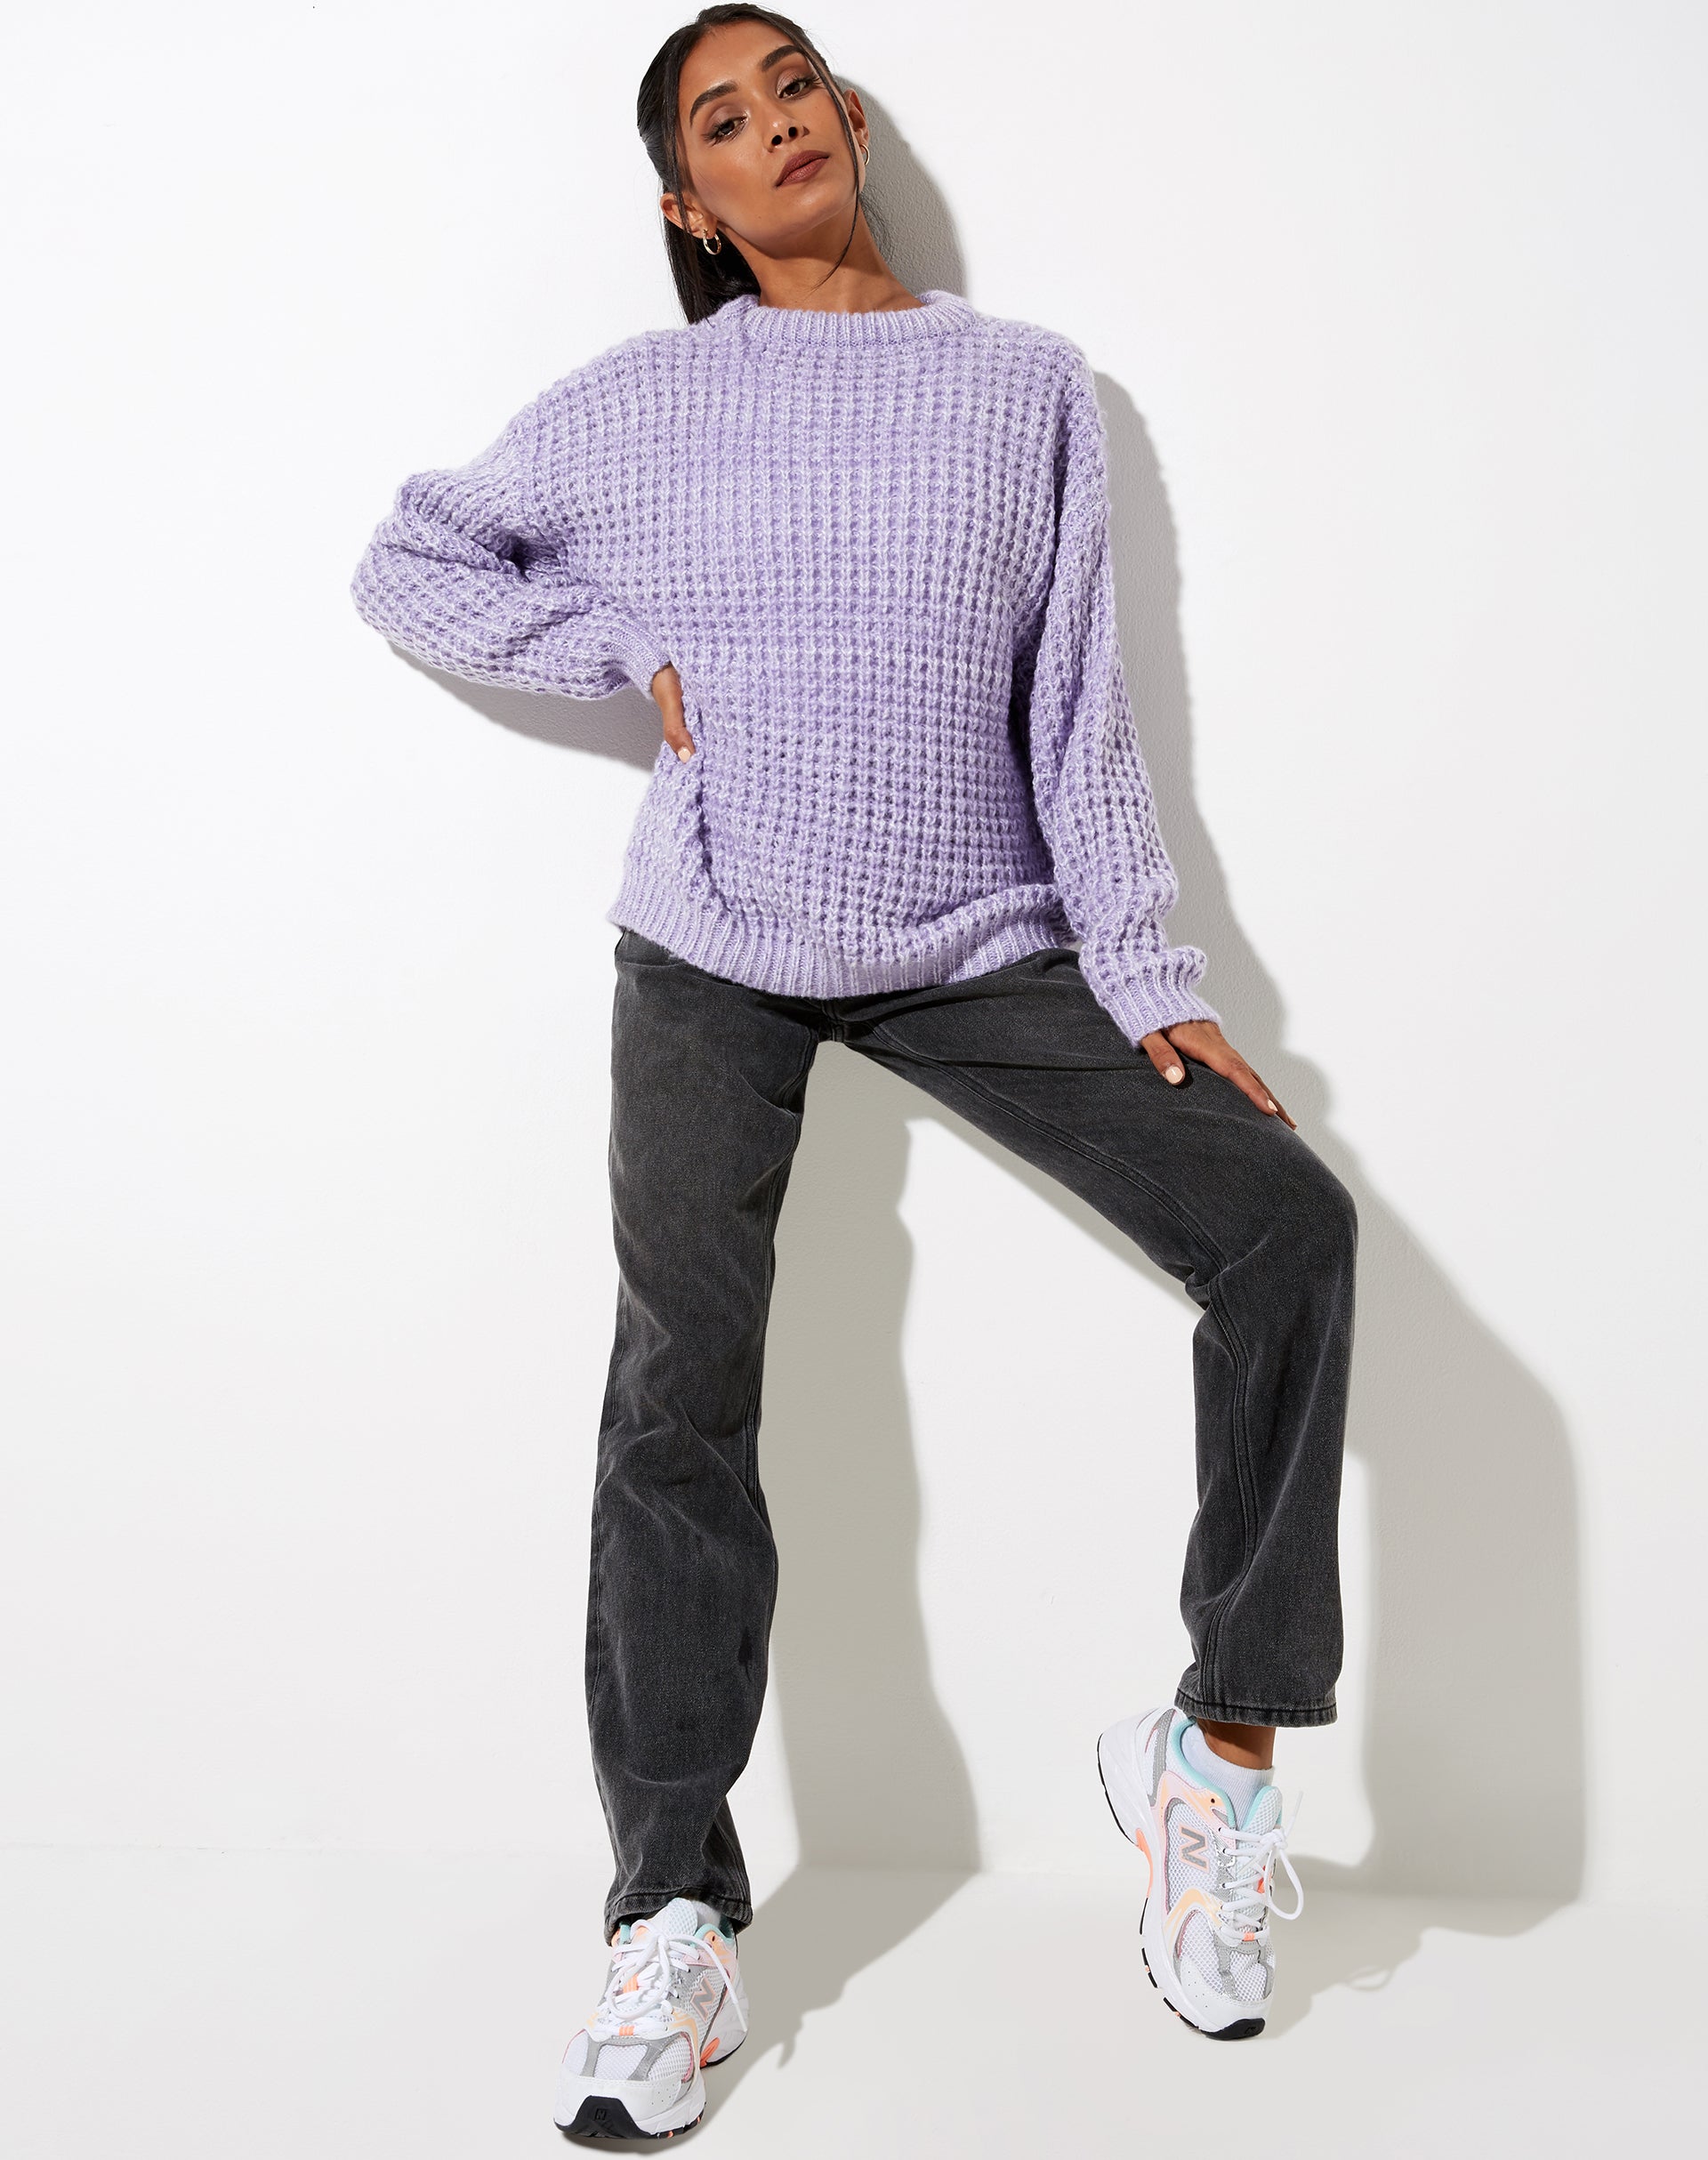 Image of Caribou Jumper in Chunky Knit Lilac and White